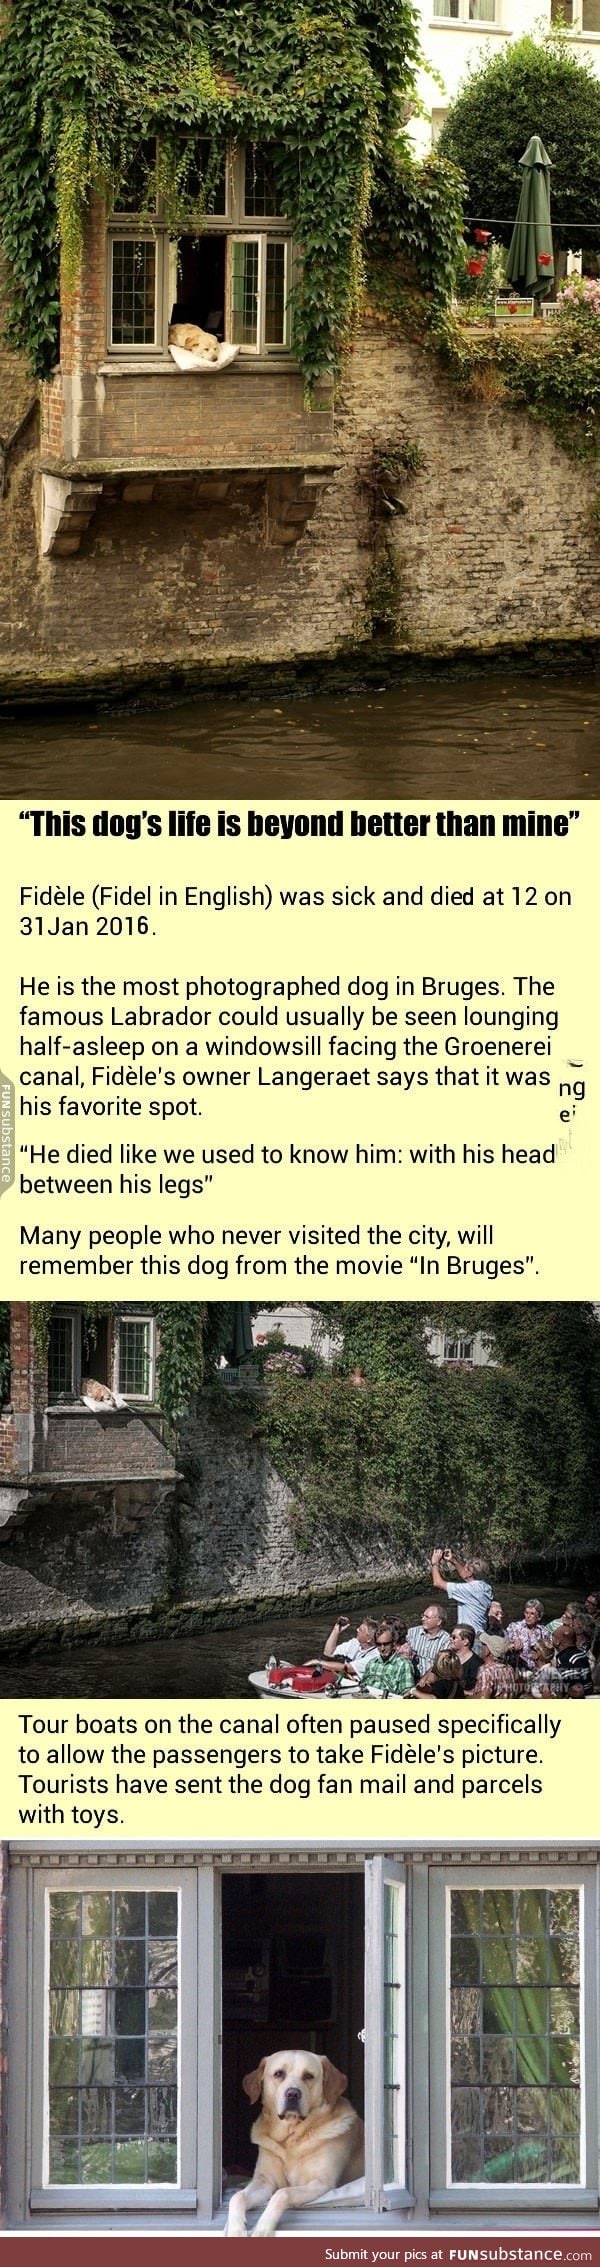 Fidele The Famous Dog Of Bruges Passed Away At Age Of 12